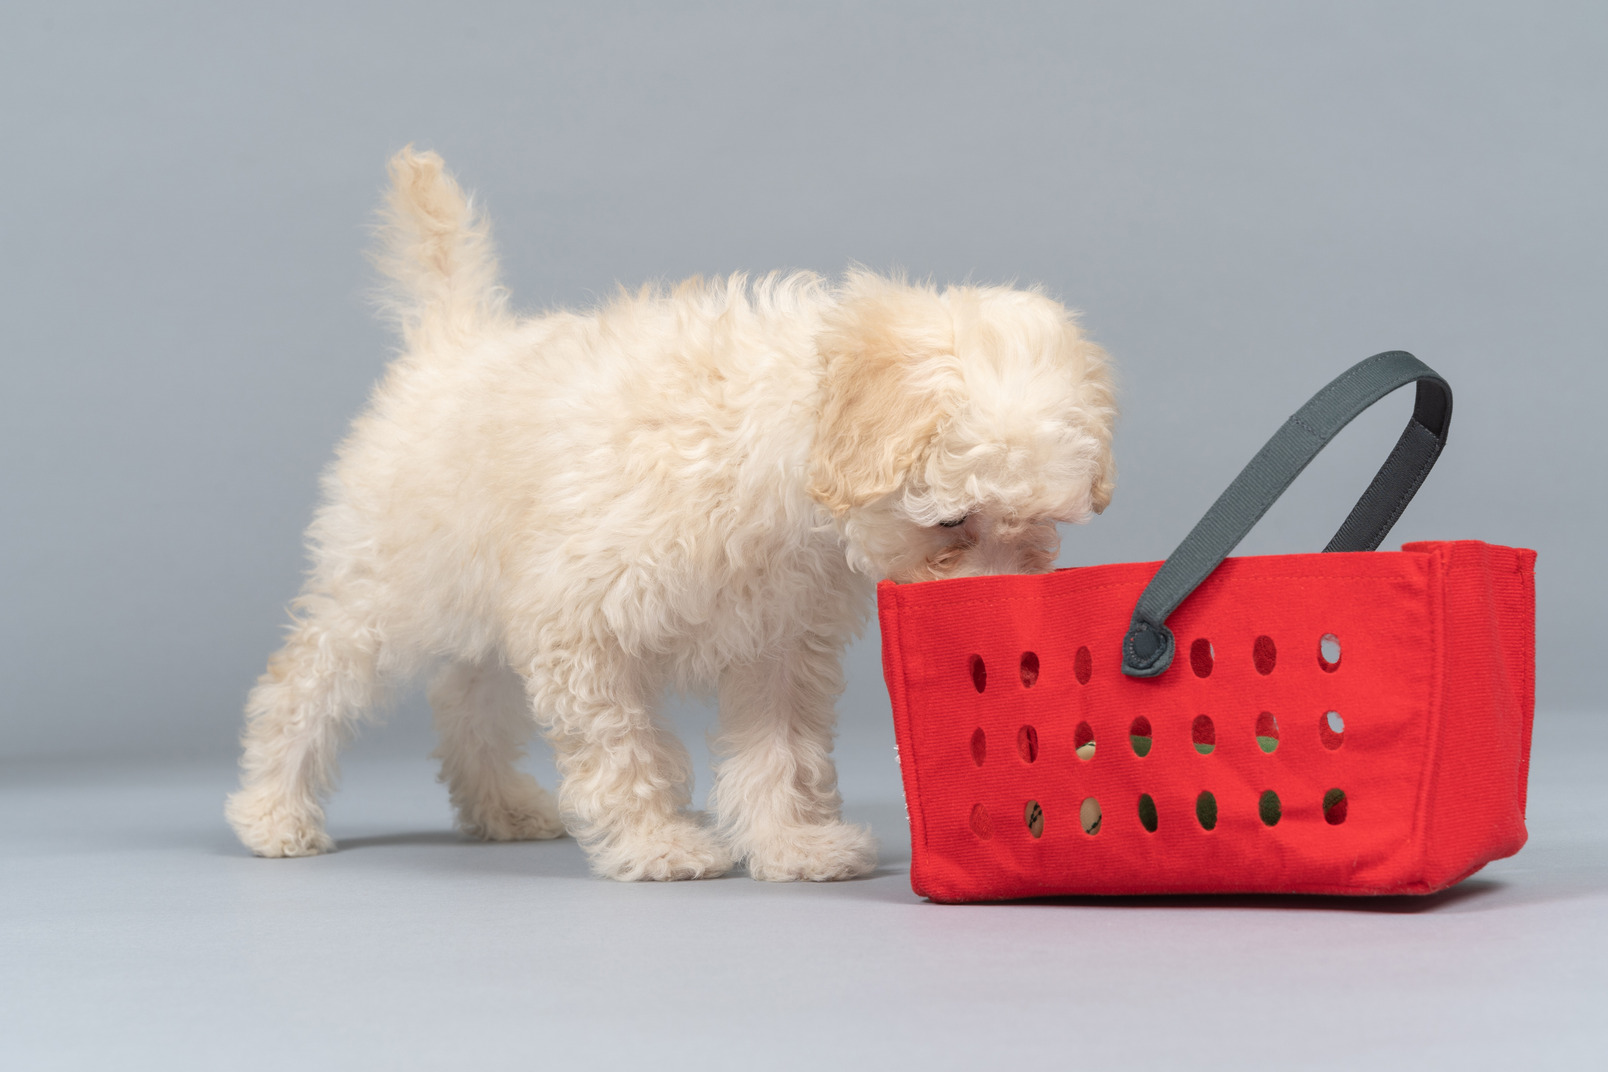 White poodle inspecting a red basket